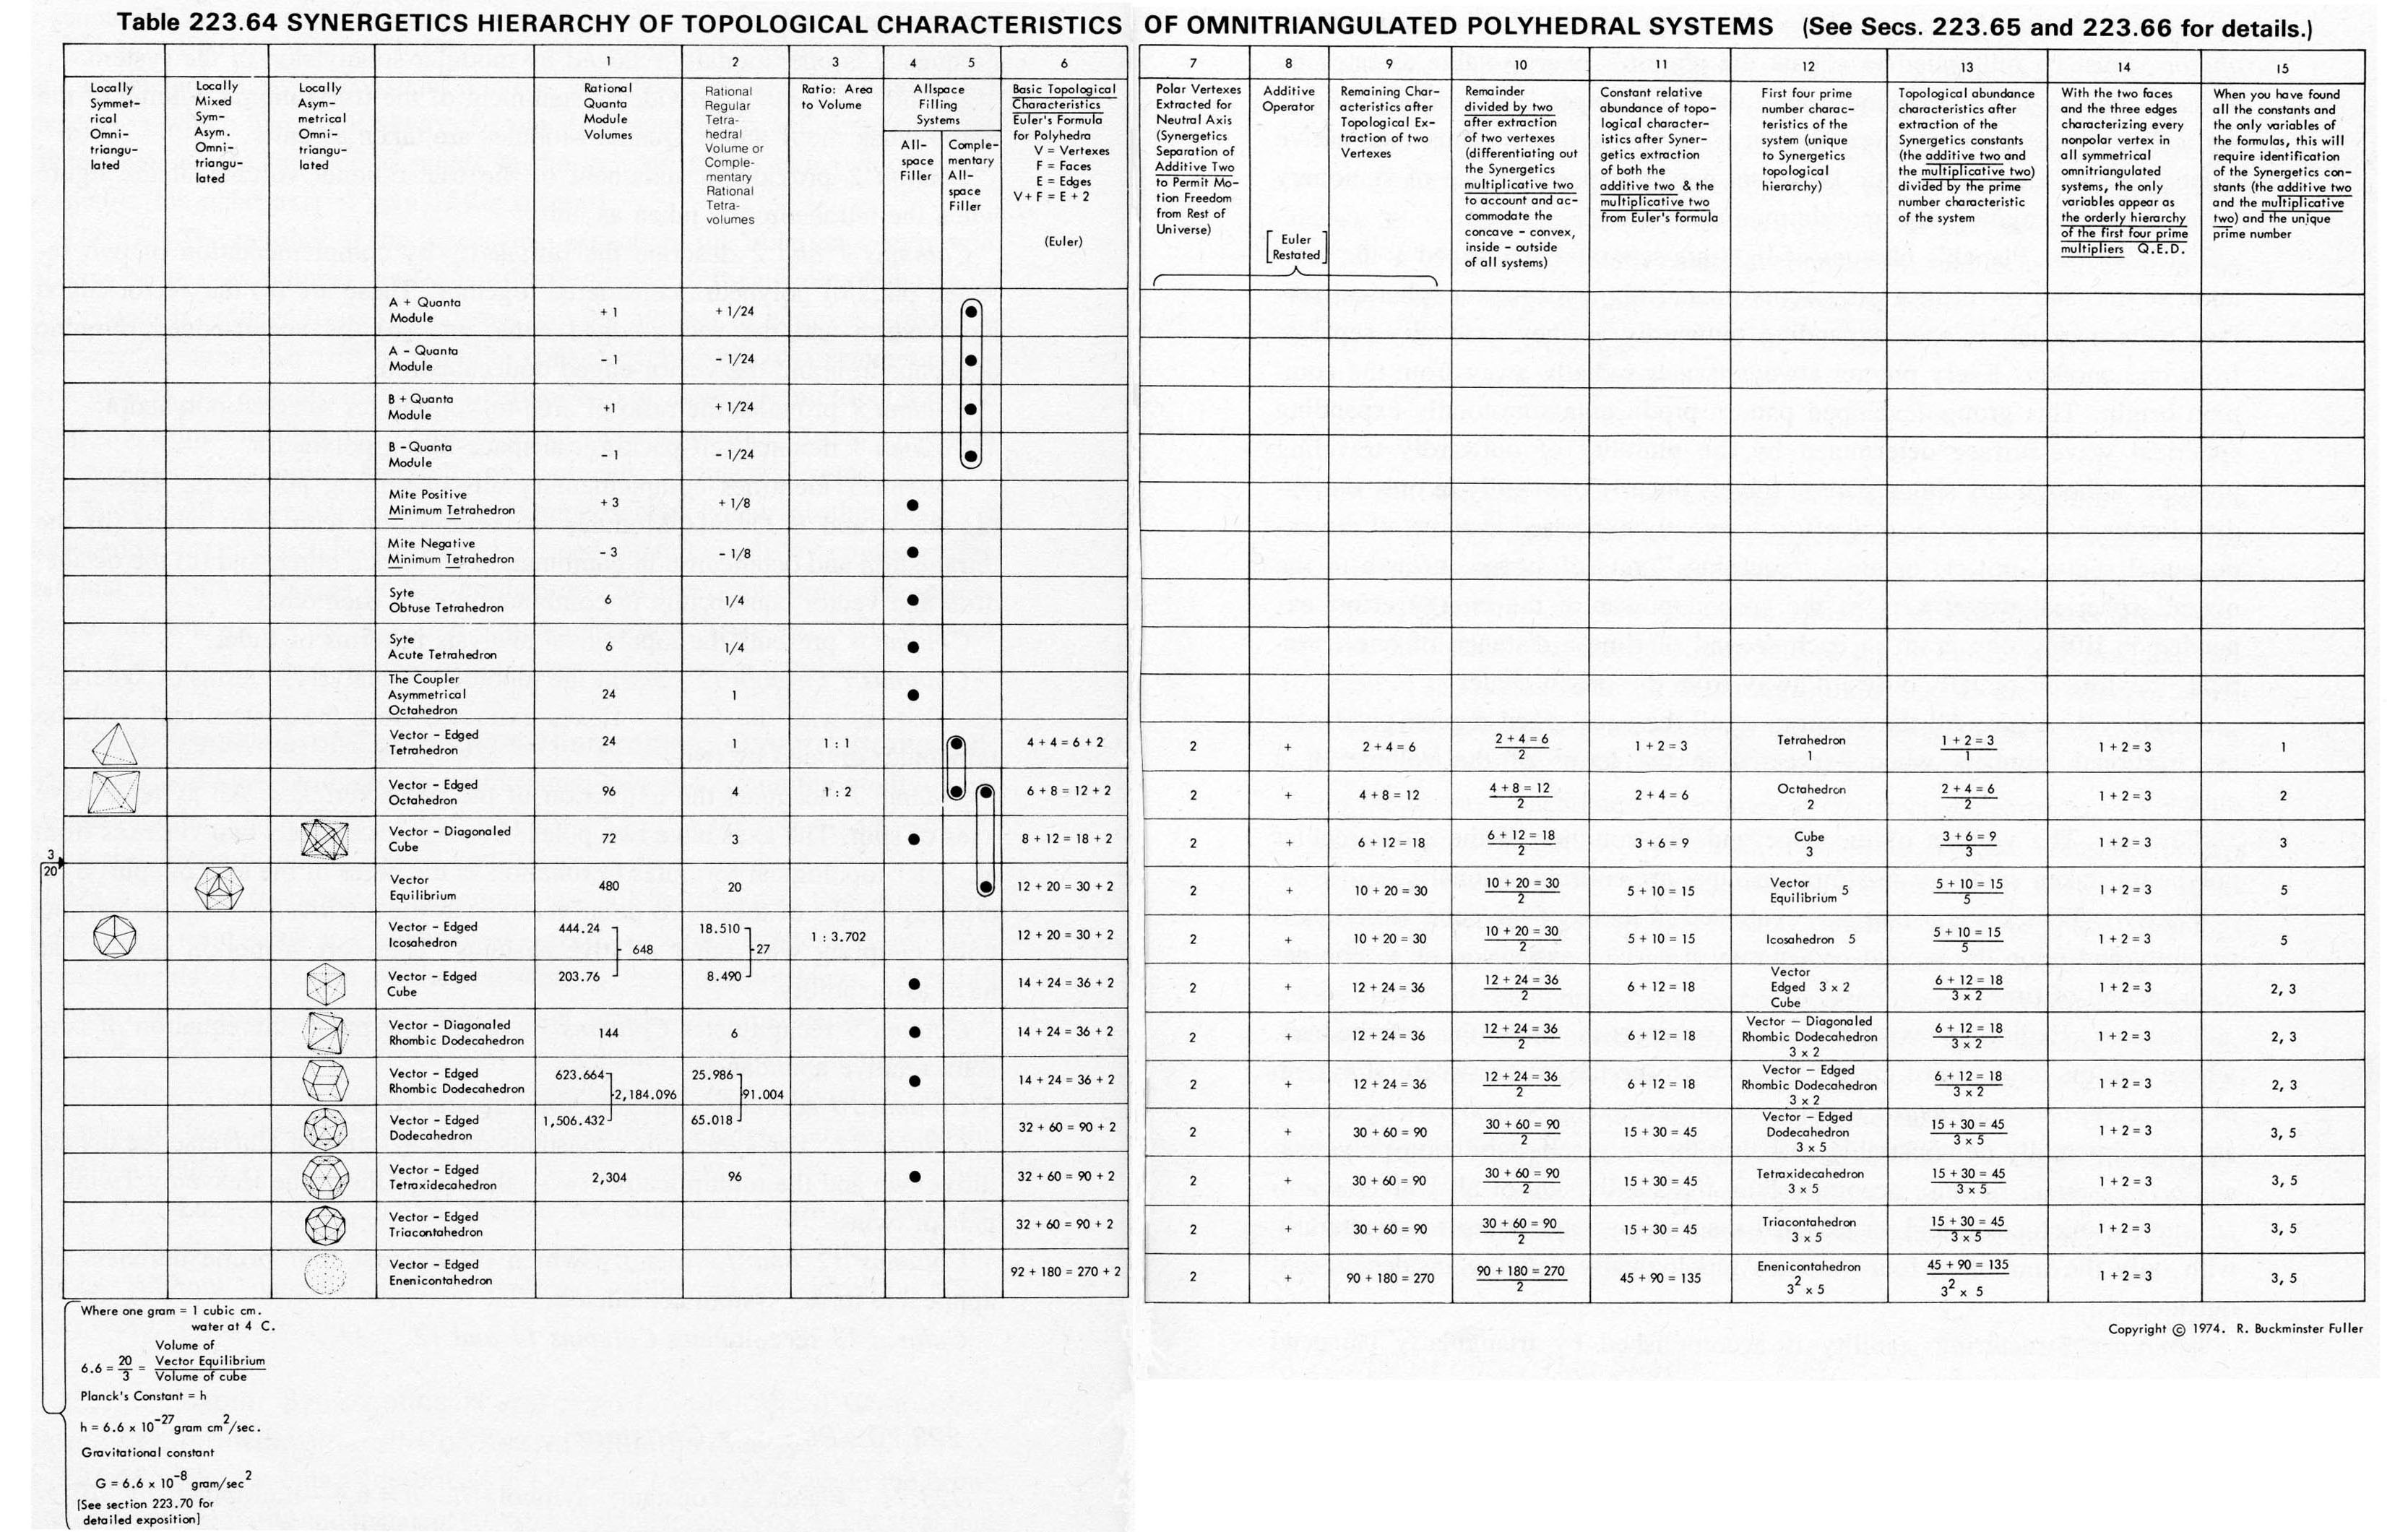 large-format table of topological characteristics